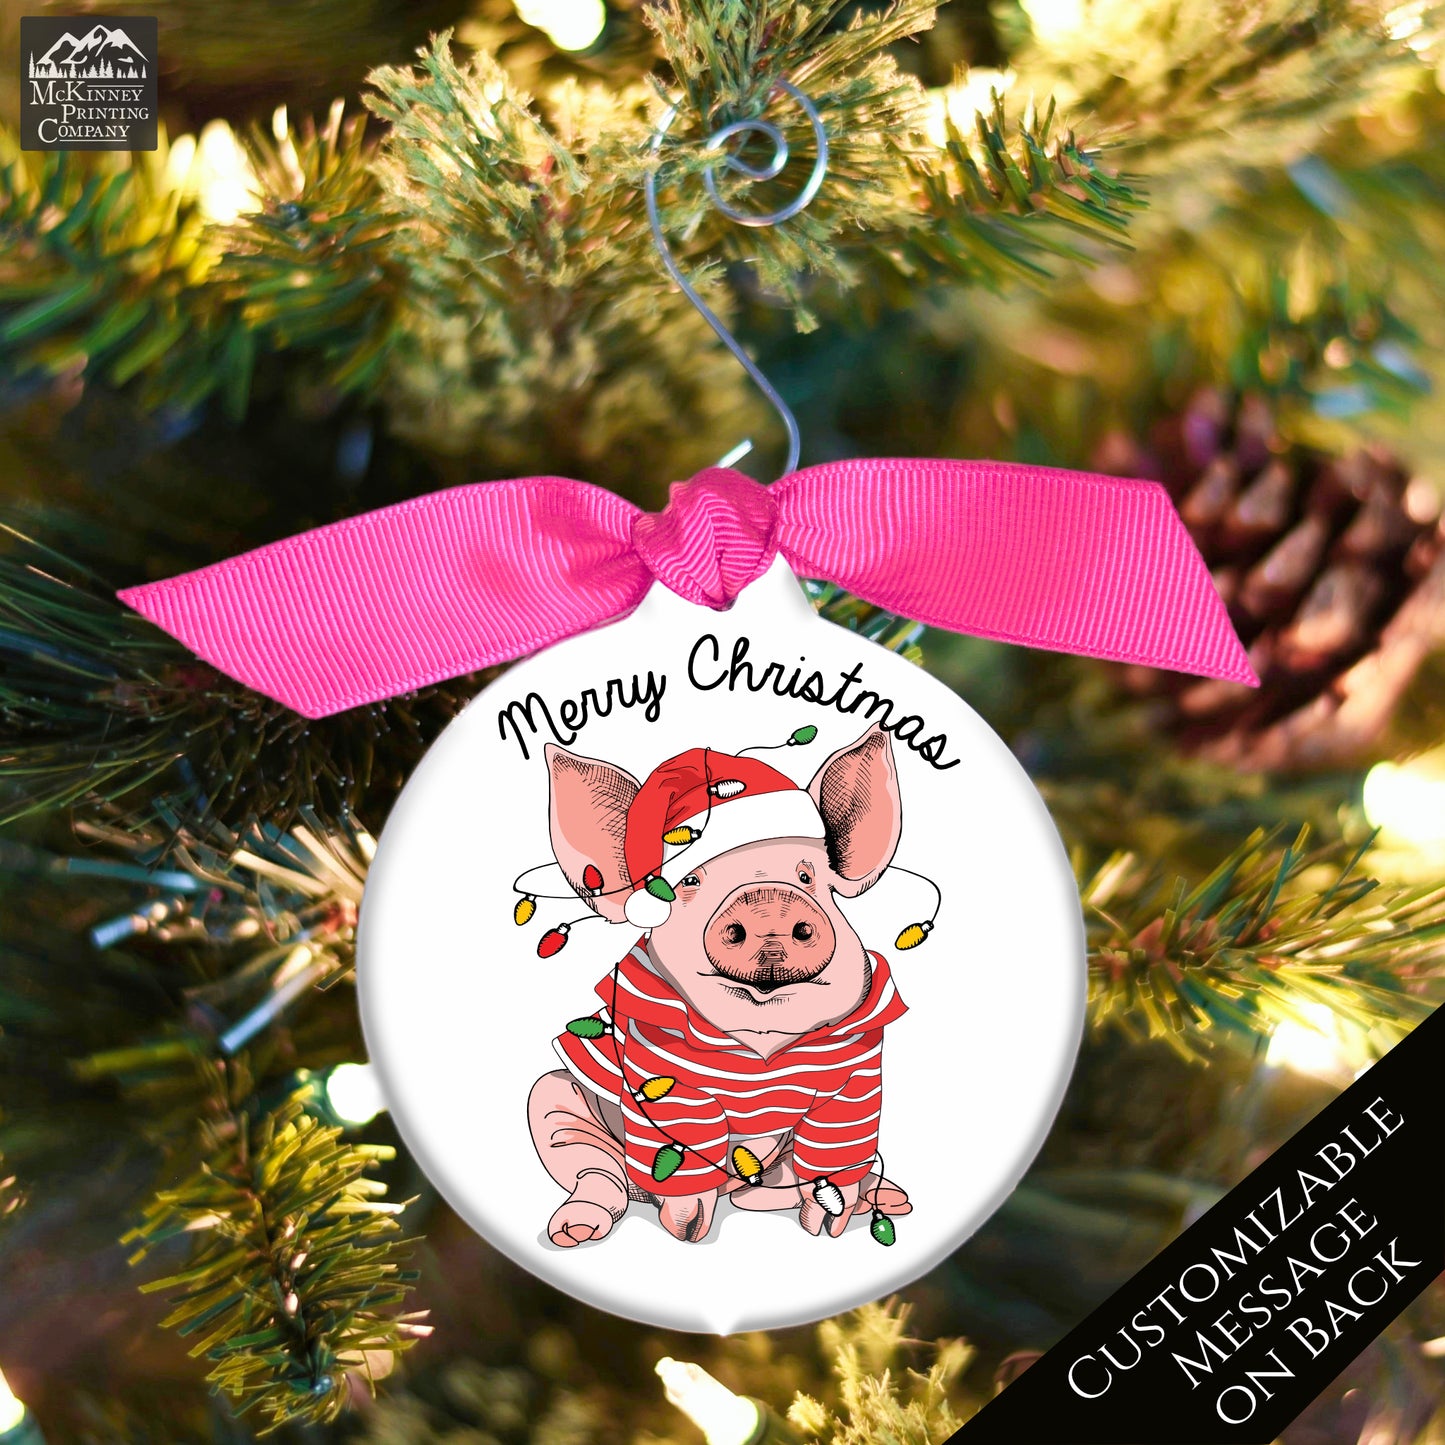 Pig Ornament - Custom Christmas Gift, Pig Lover Gift, Personalized